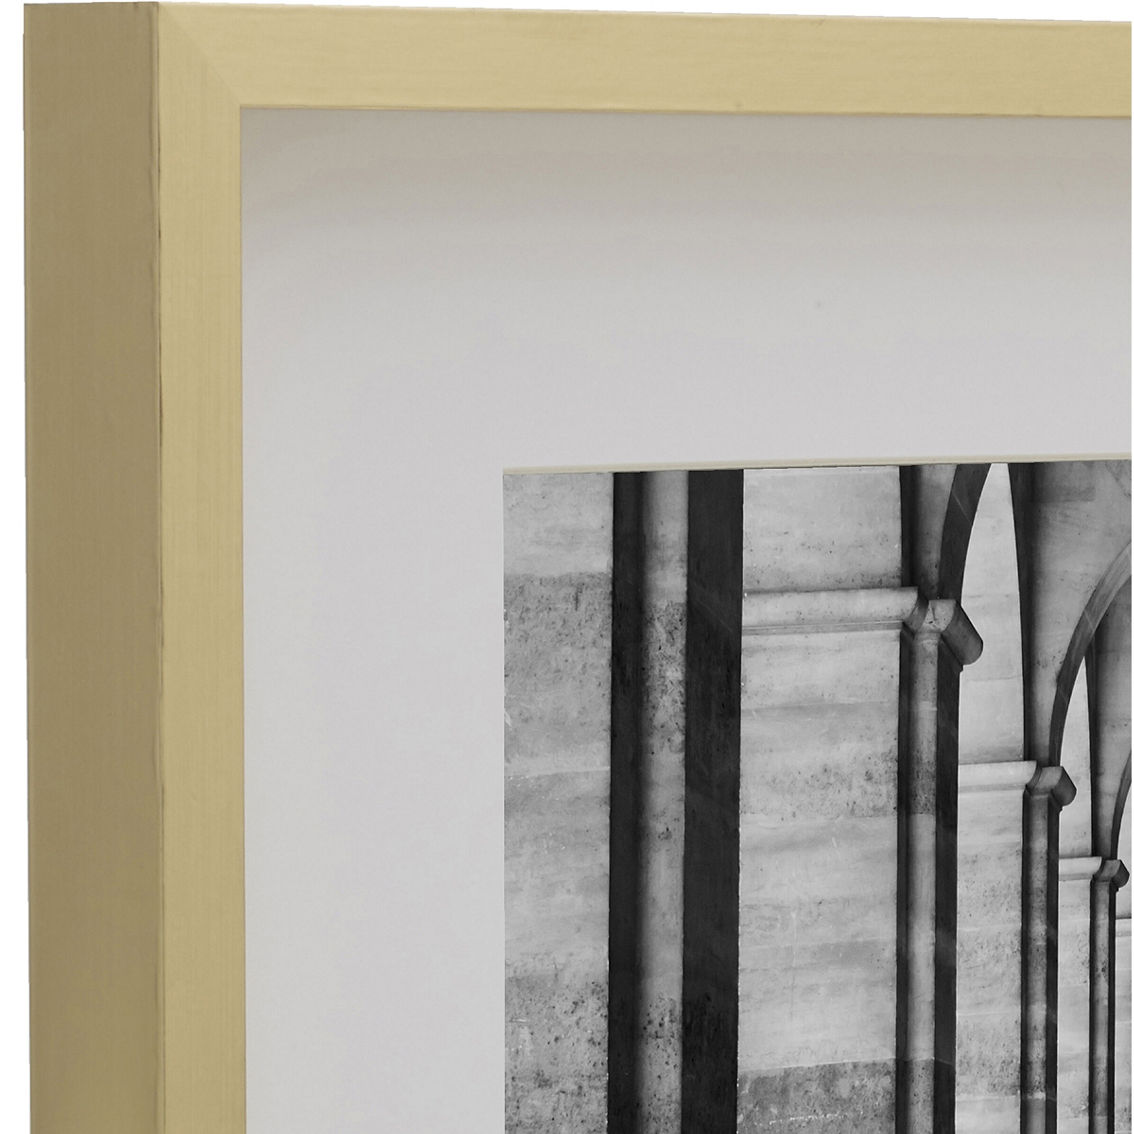 Mikasa Home 11x14 / 16x20 Gold Gallery Frame - Image 4 of 6